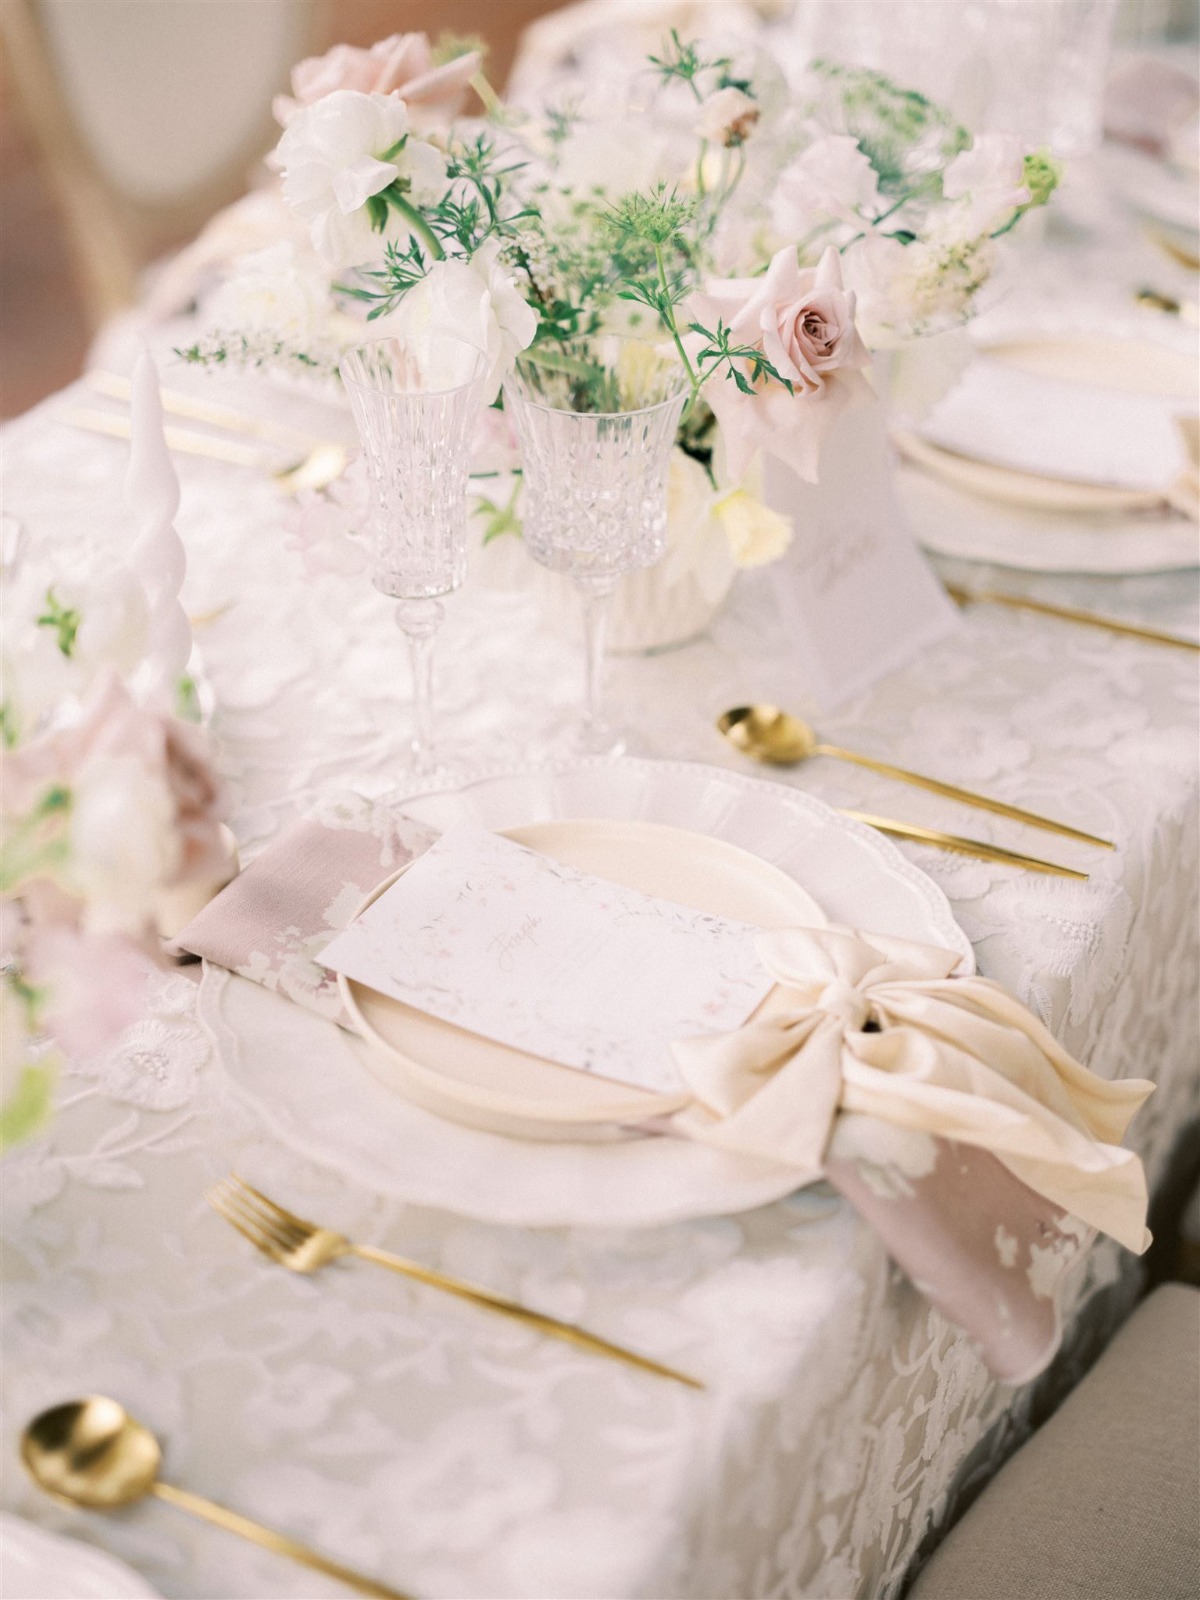 gold flatware for placesetting